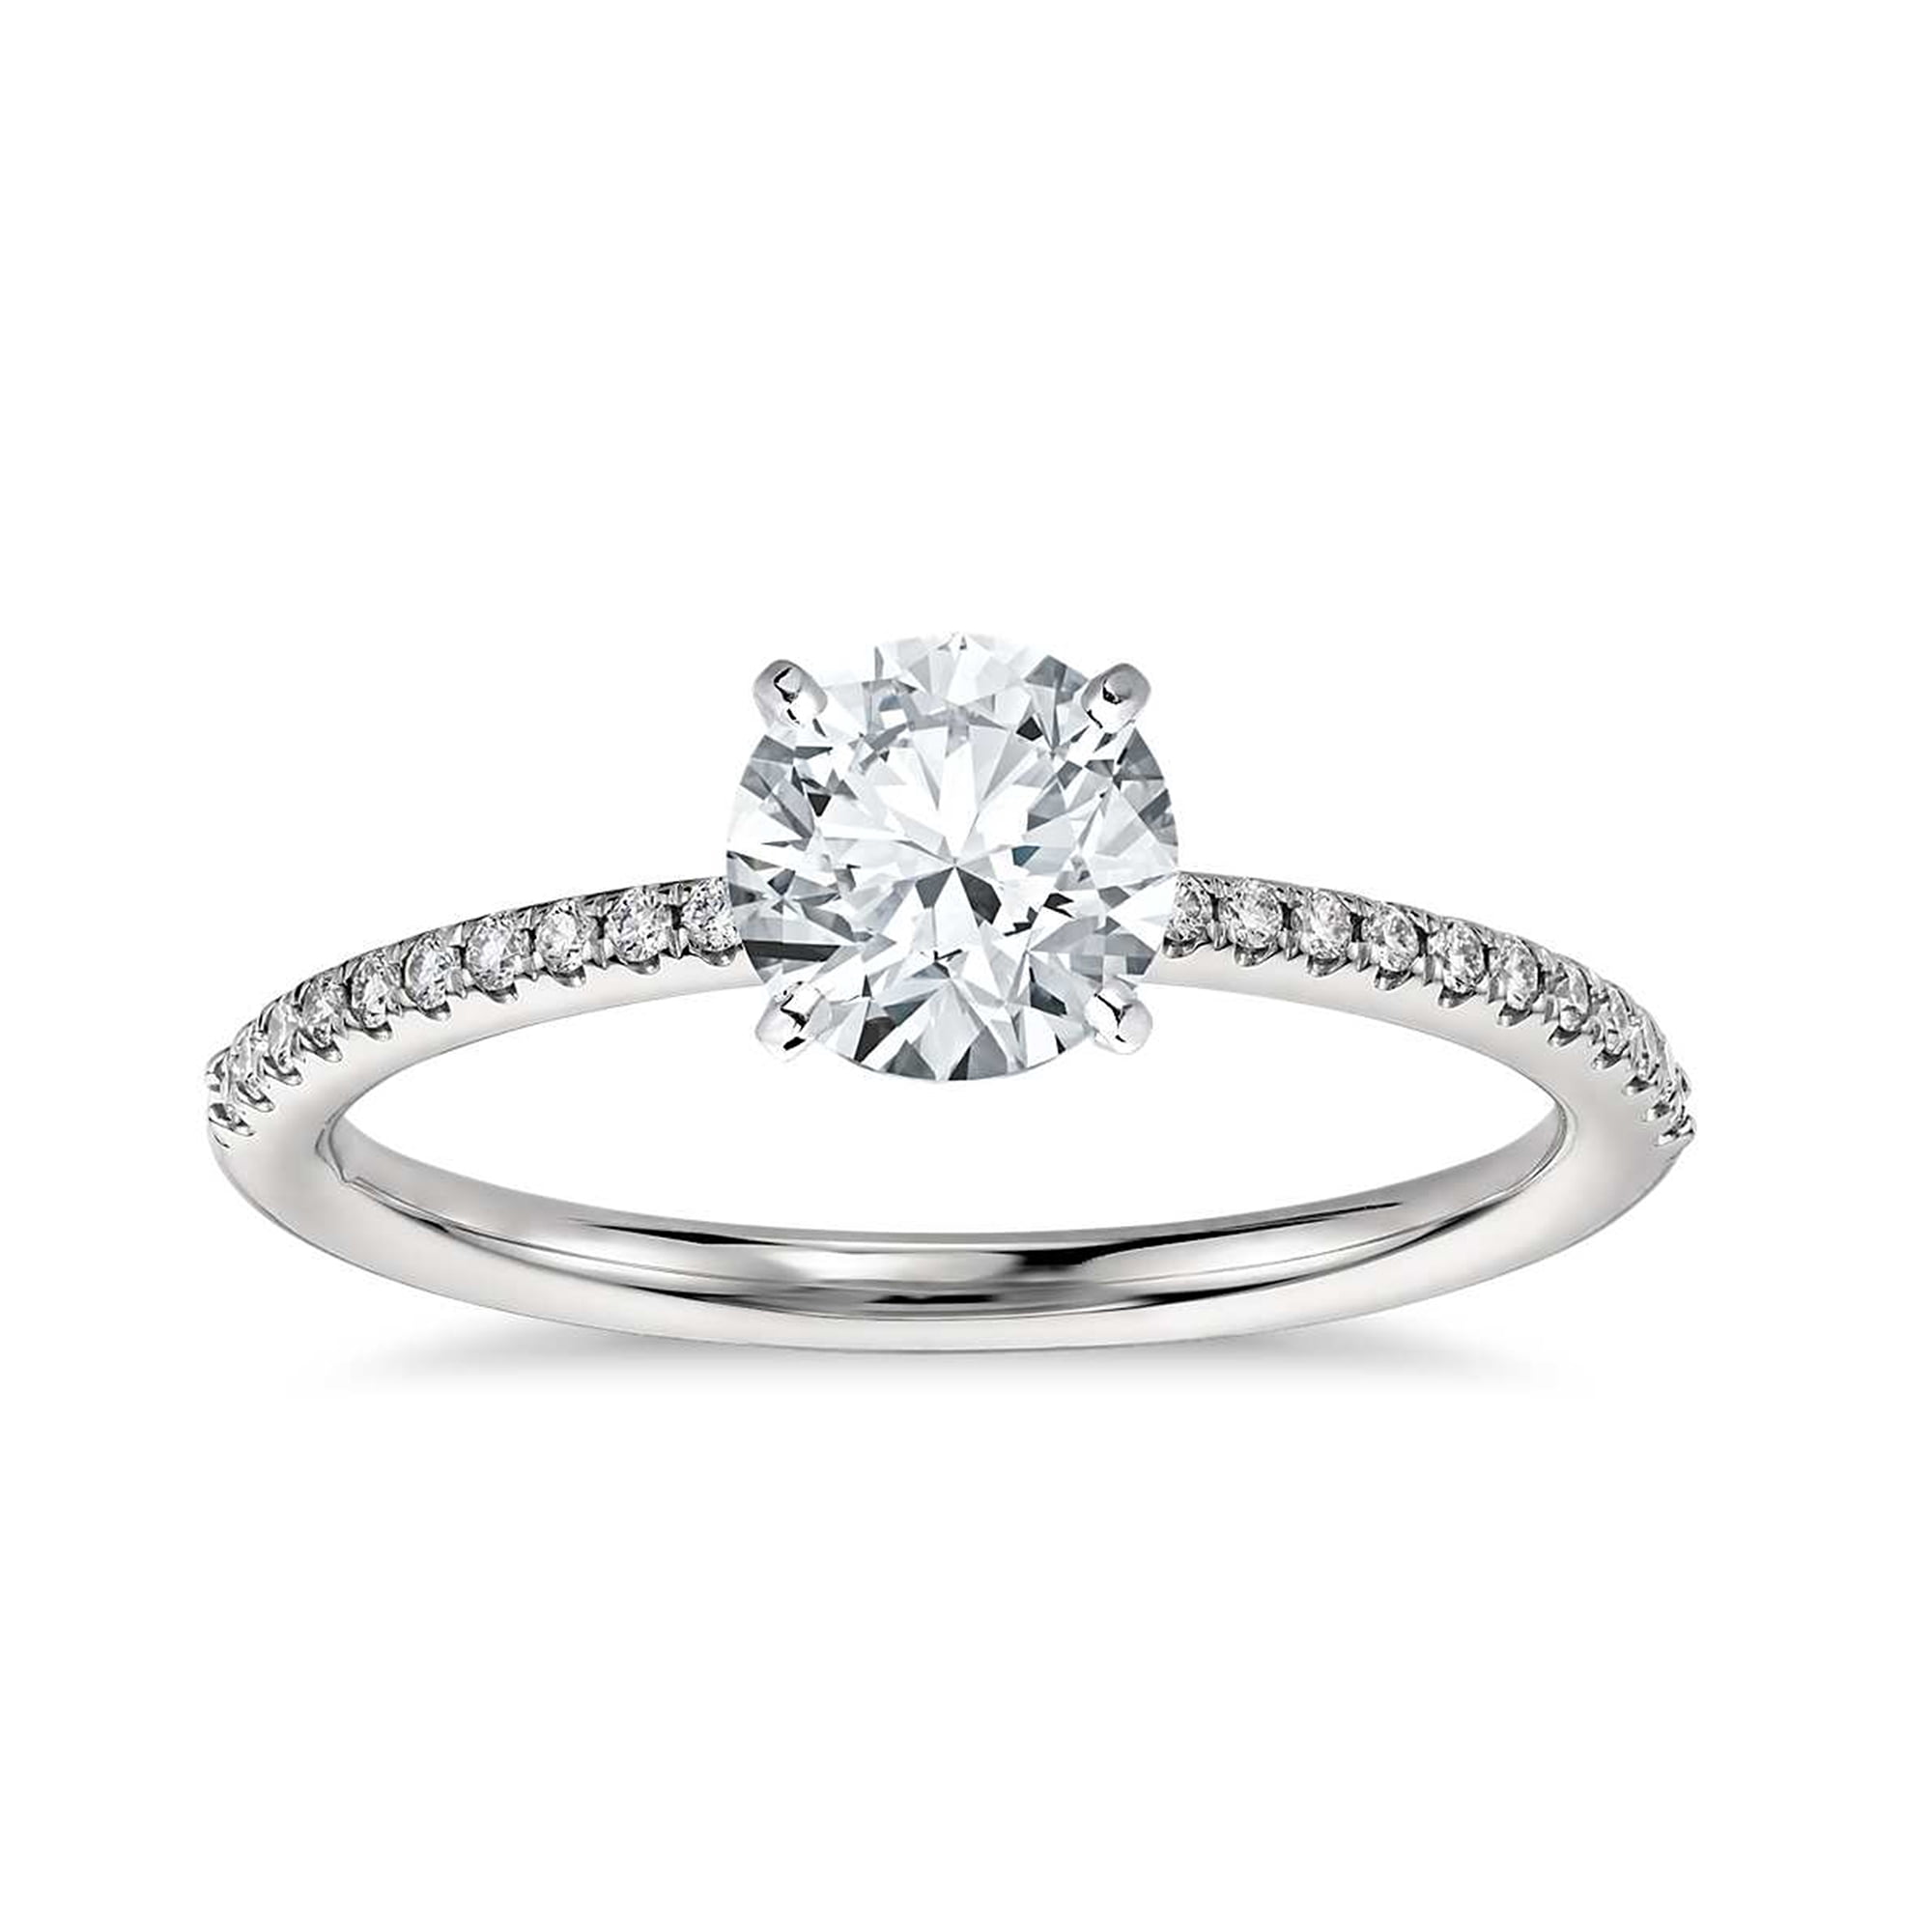 Solitaire Rings NEW Details about   3 Ct Round Solitaire Engagement Ring CZ Halo 925 Silver 